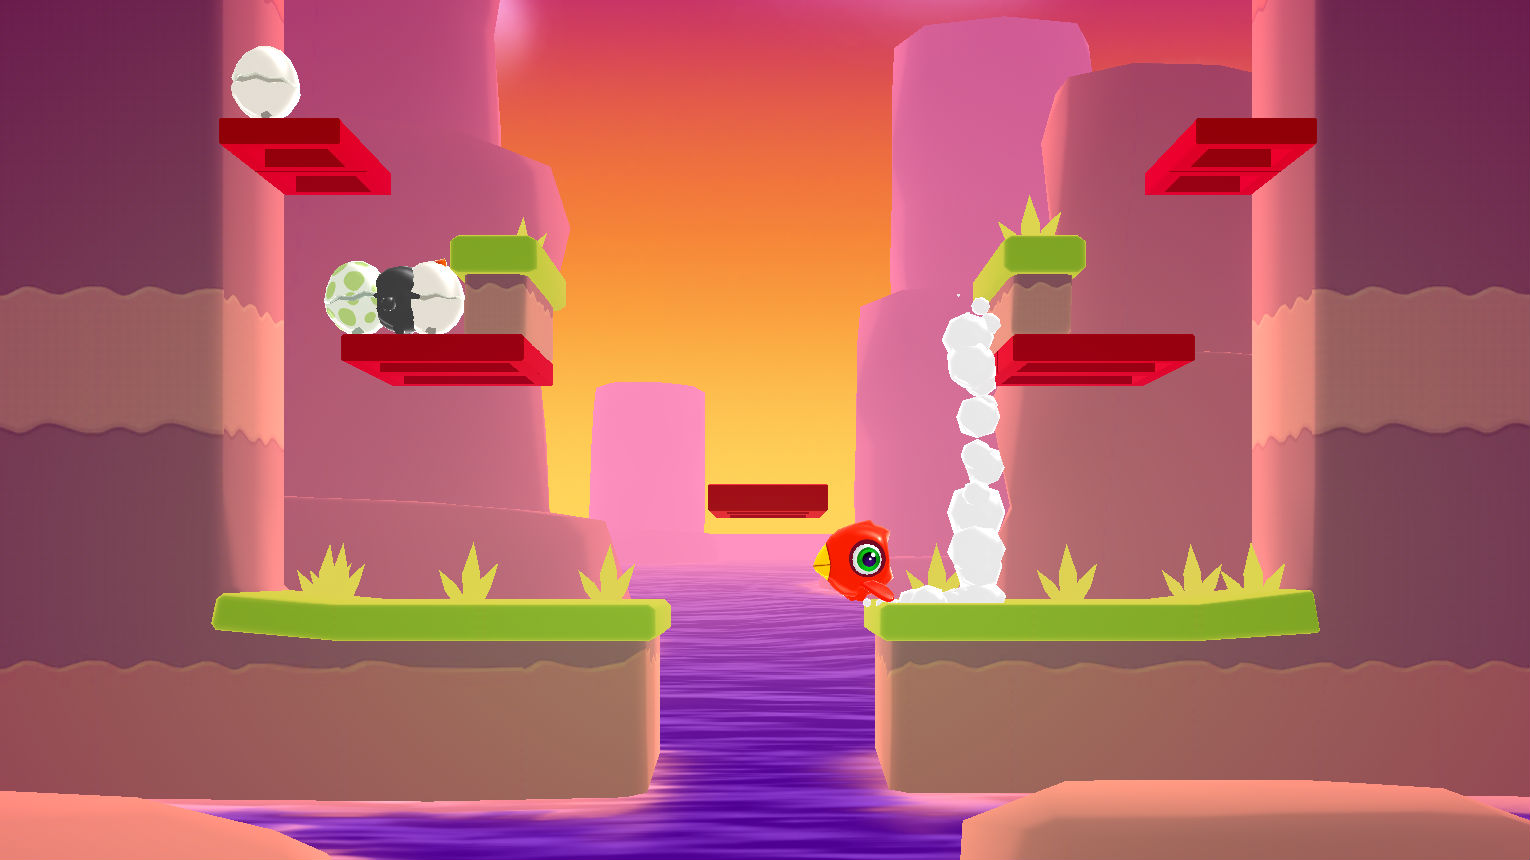 Happymagenta’s Wingy Pop Flies Onto iOS With One-Touch Style